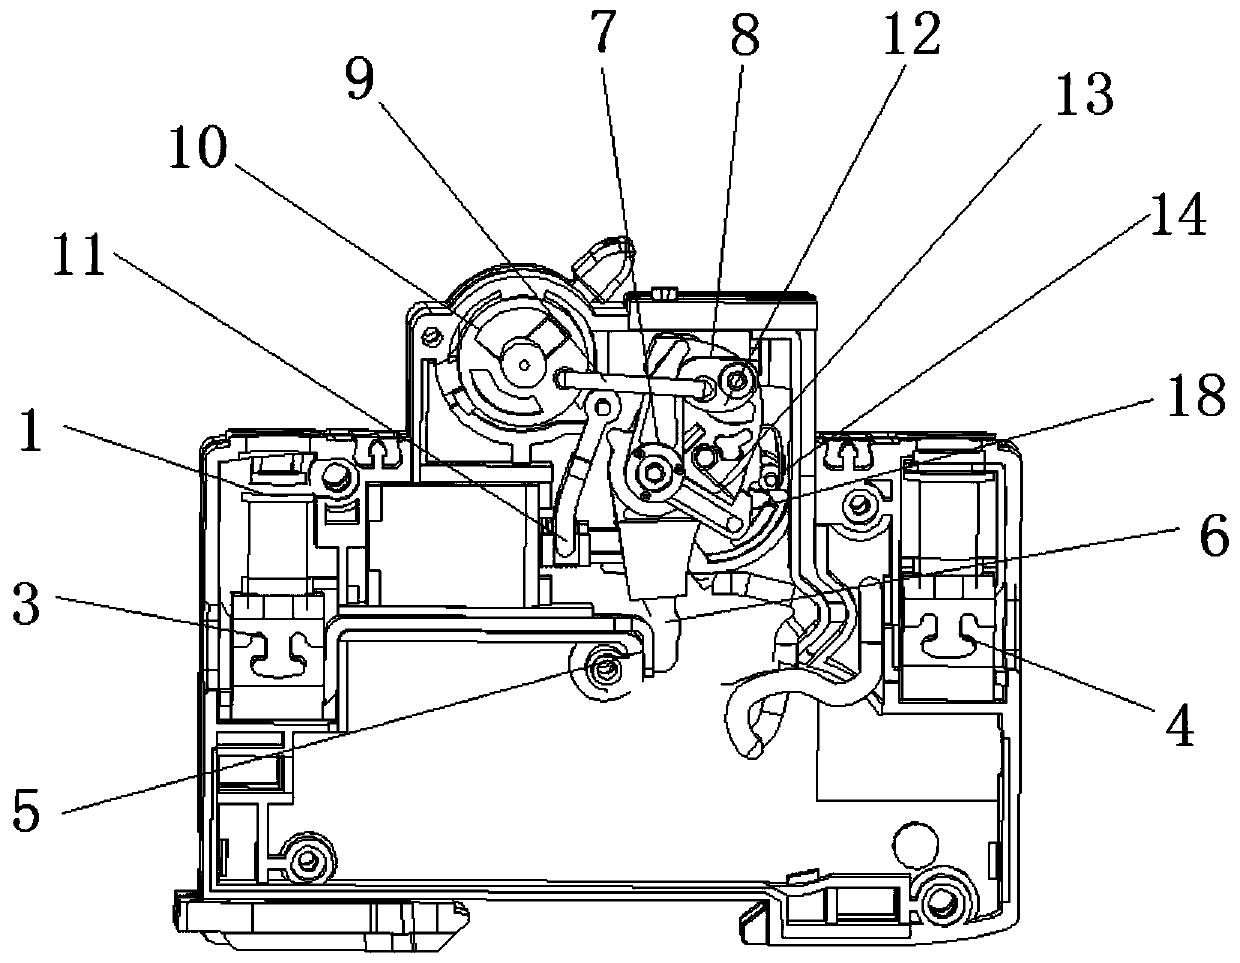 Circuit breaker with N pole free of arc-extinguishing device